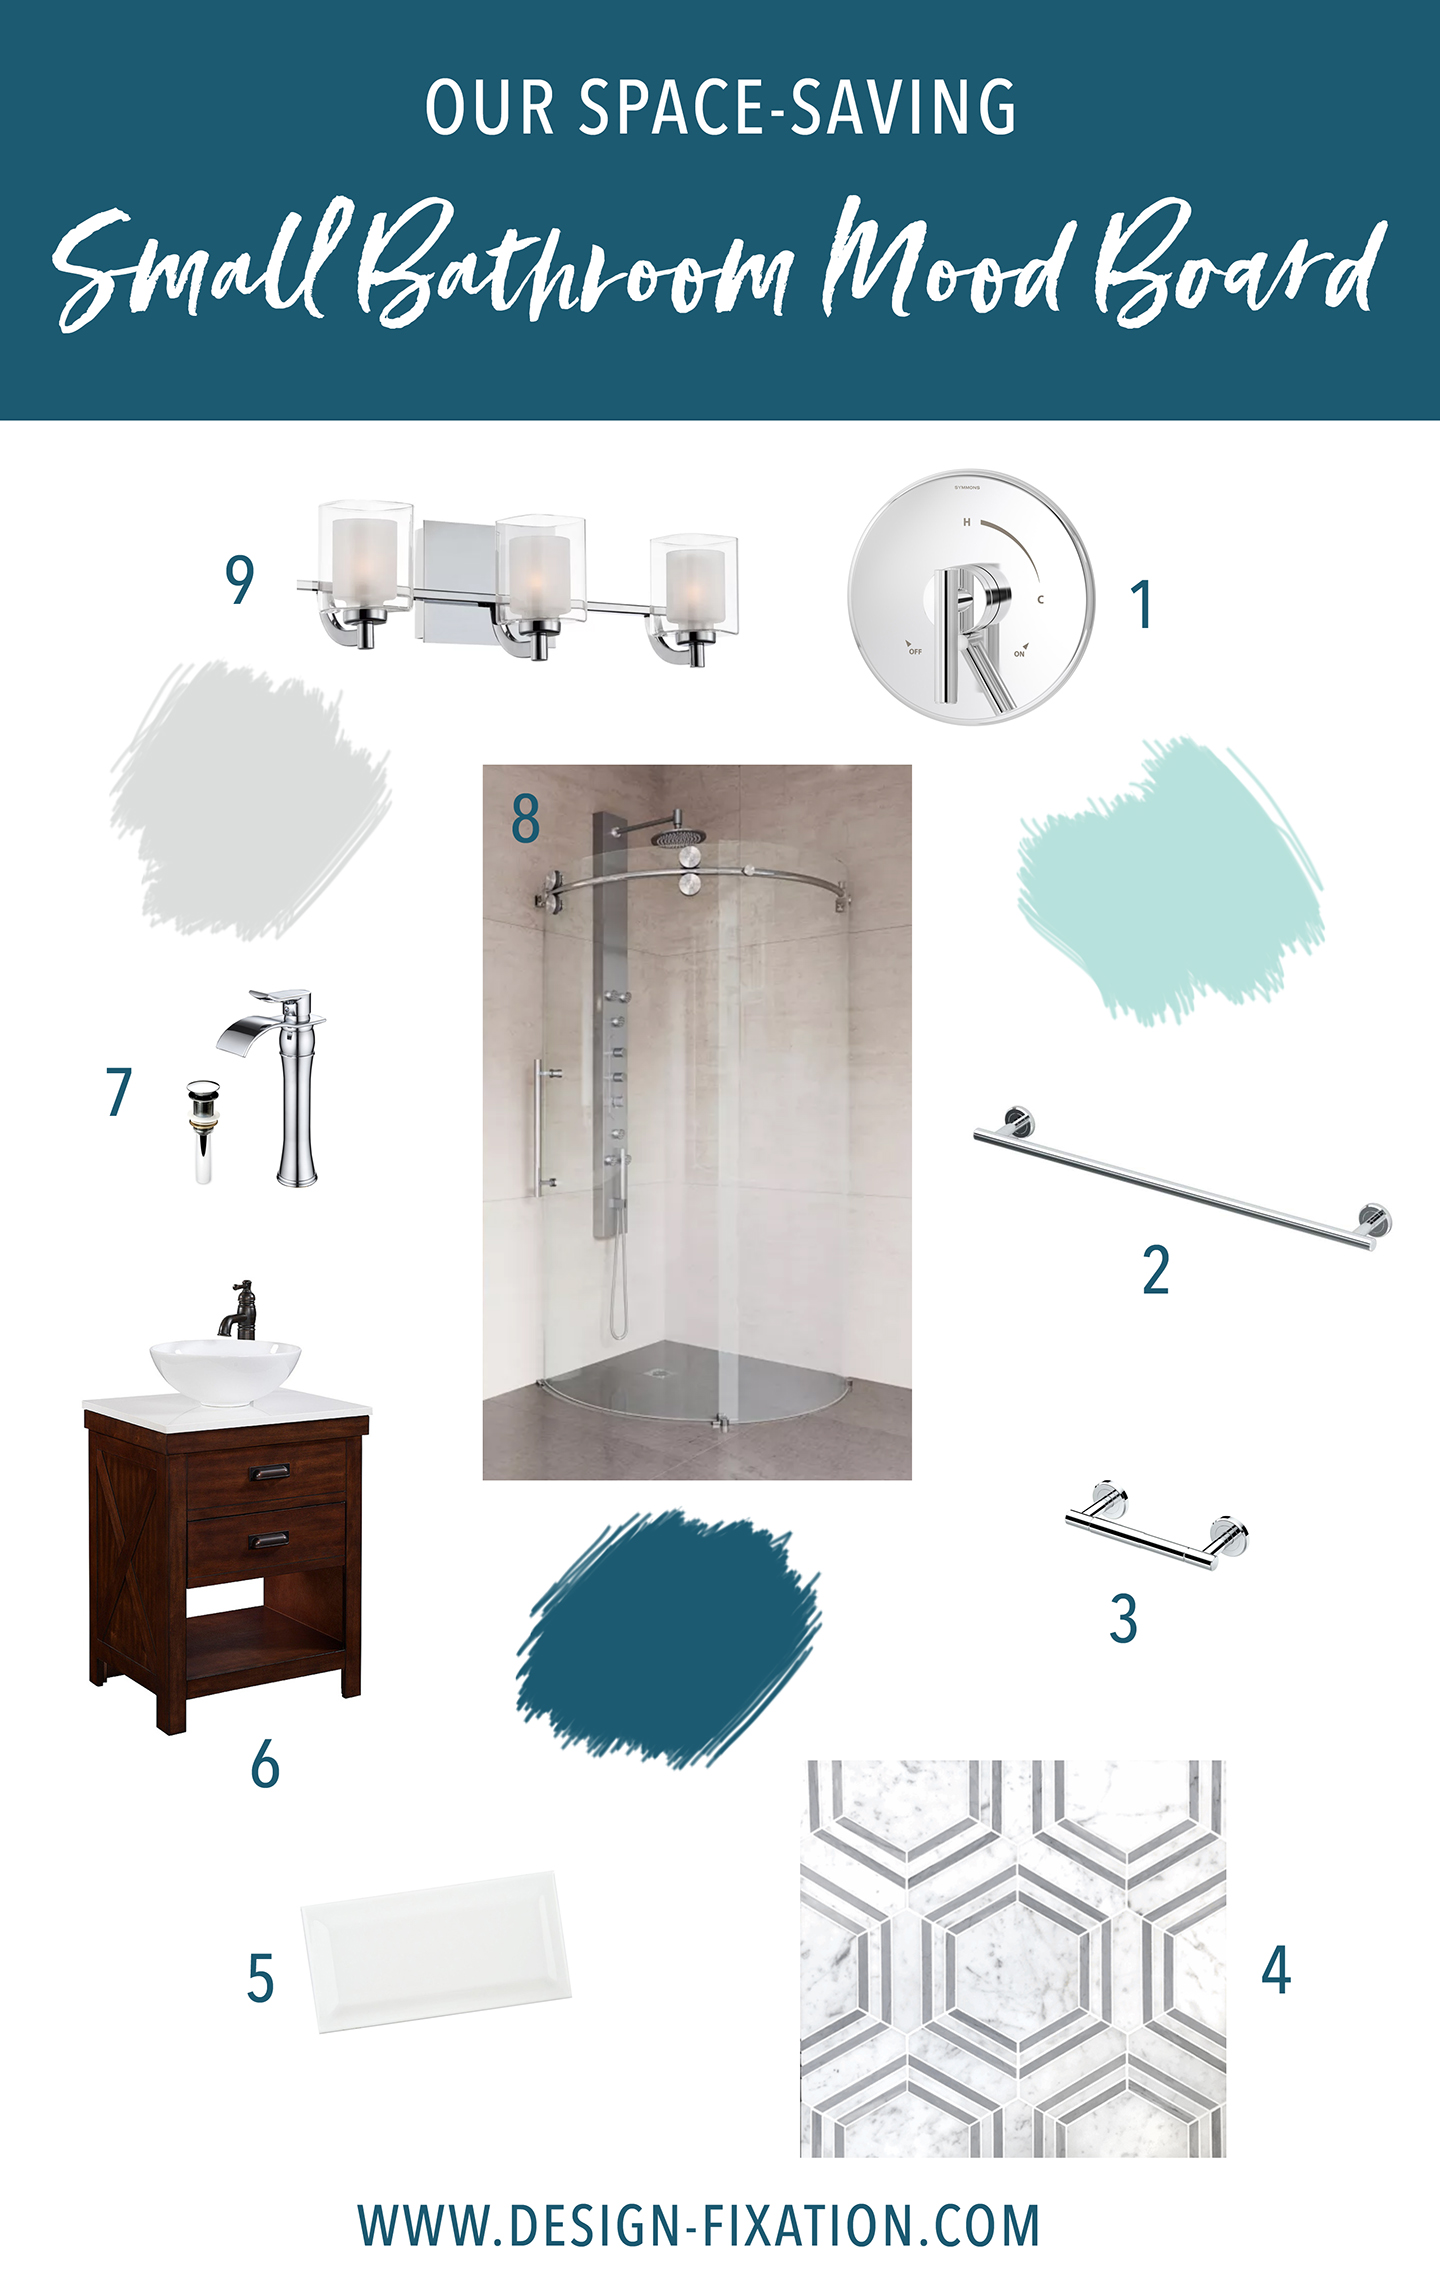 One Room Challenge: Our Space-Saving Bathroom Ideas /// By Design Fixation #bathroom #renovation #shopping